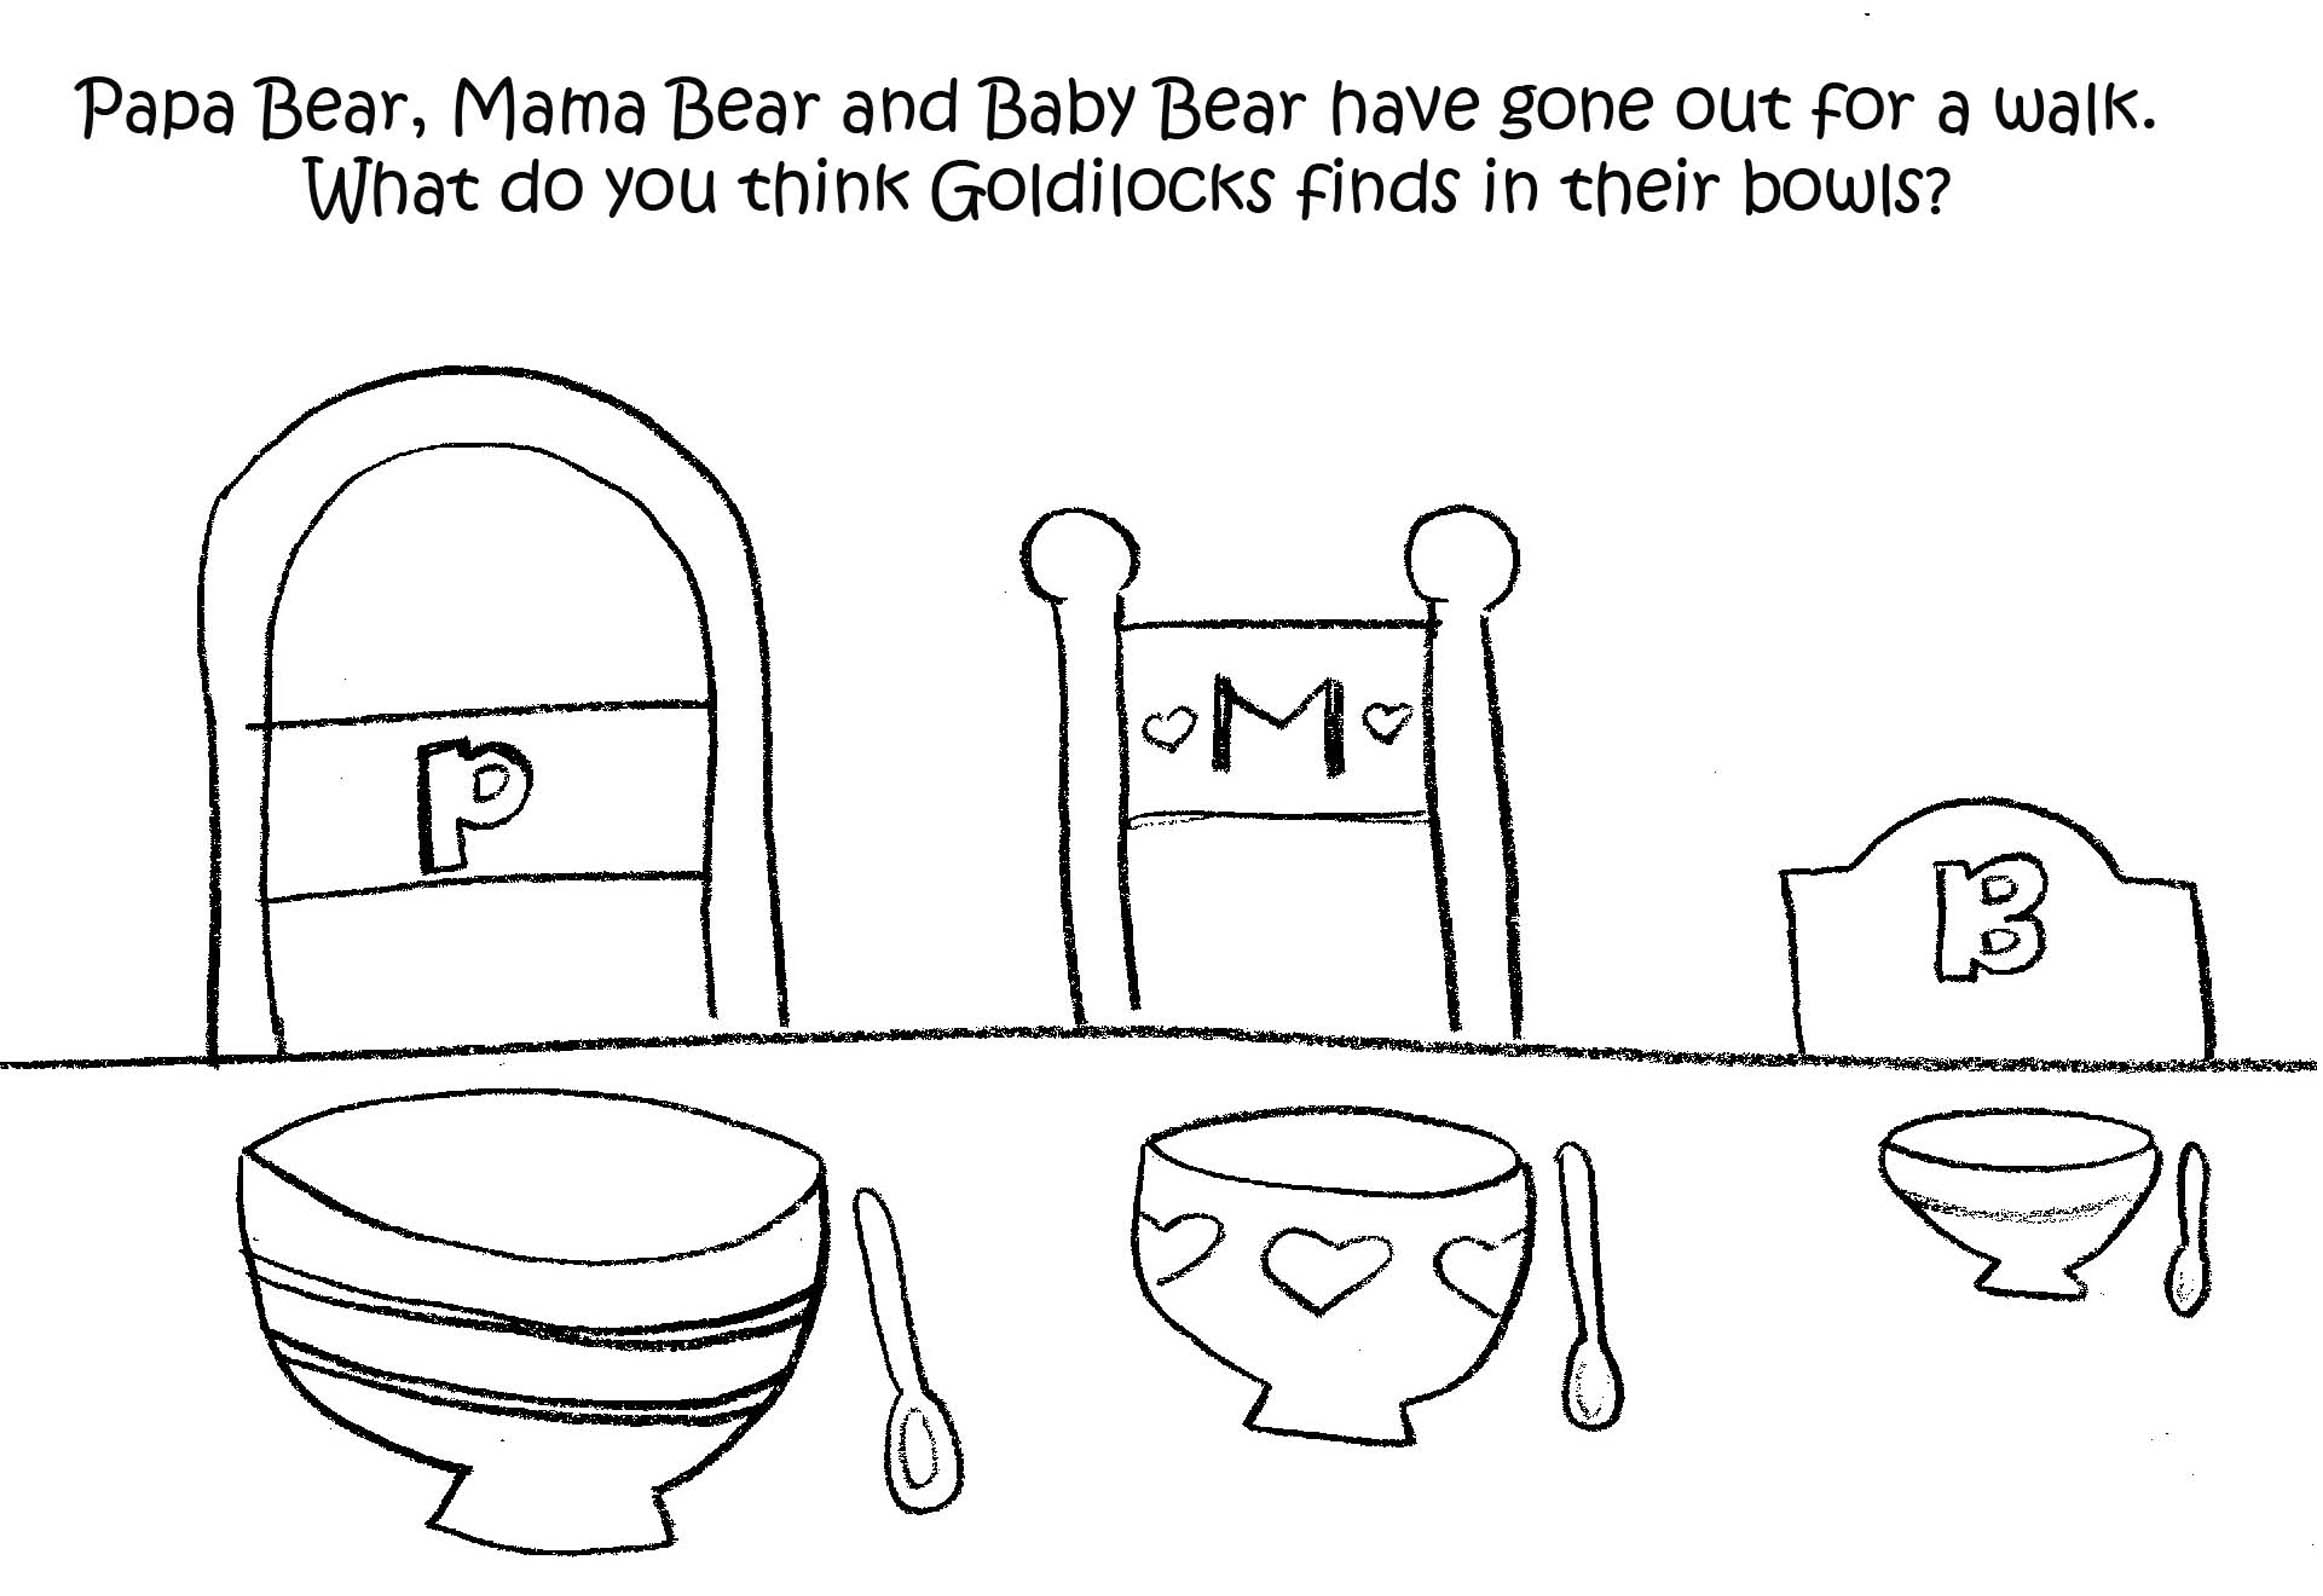 20 Best Images of The Three Bears Sequencing Worksheet Goldilocks and